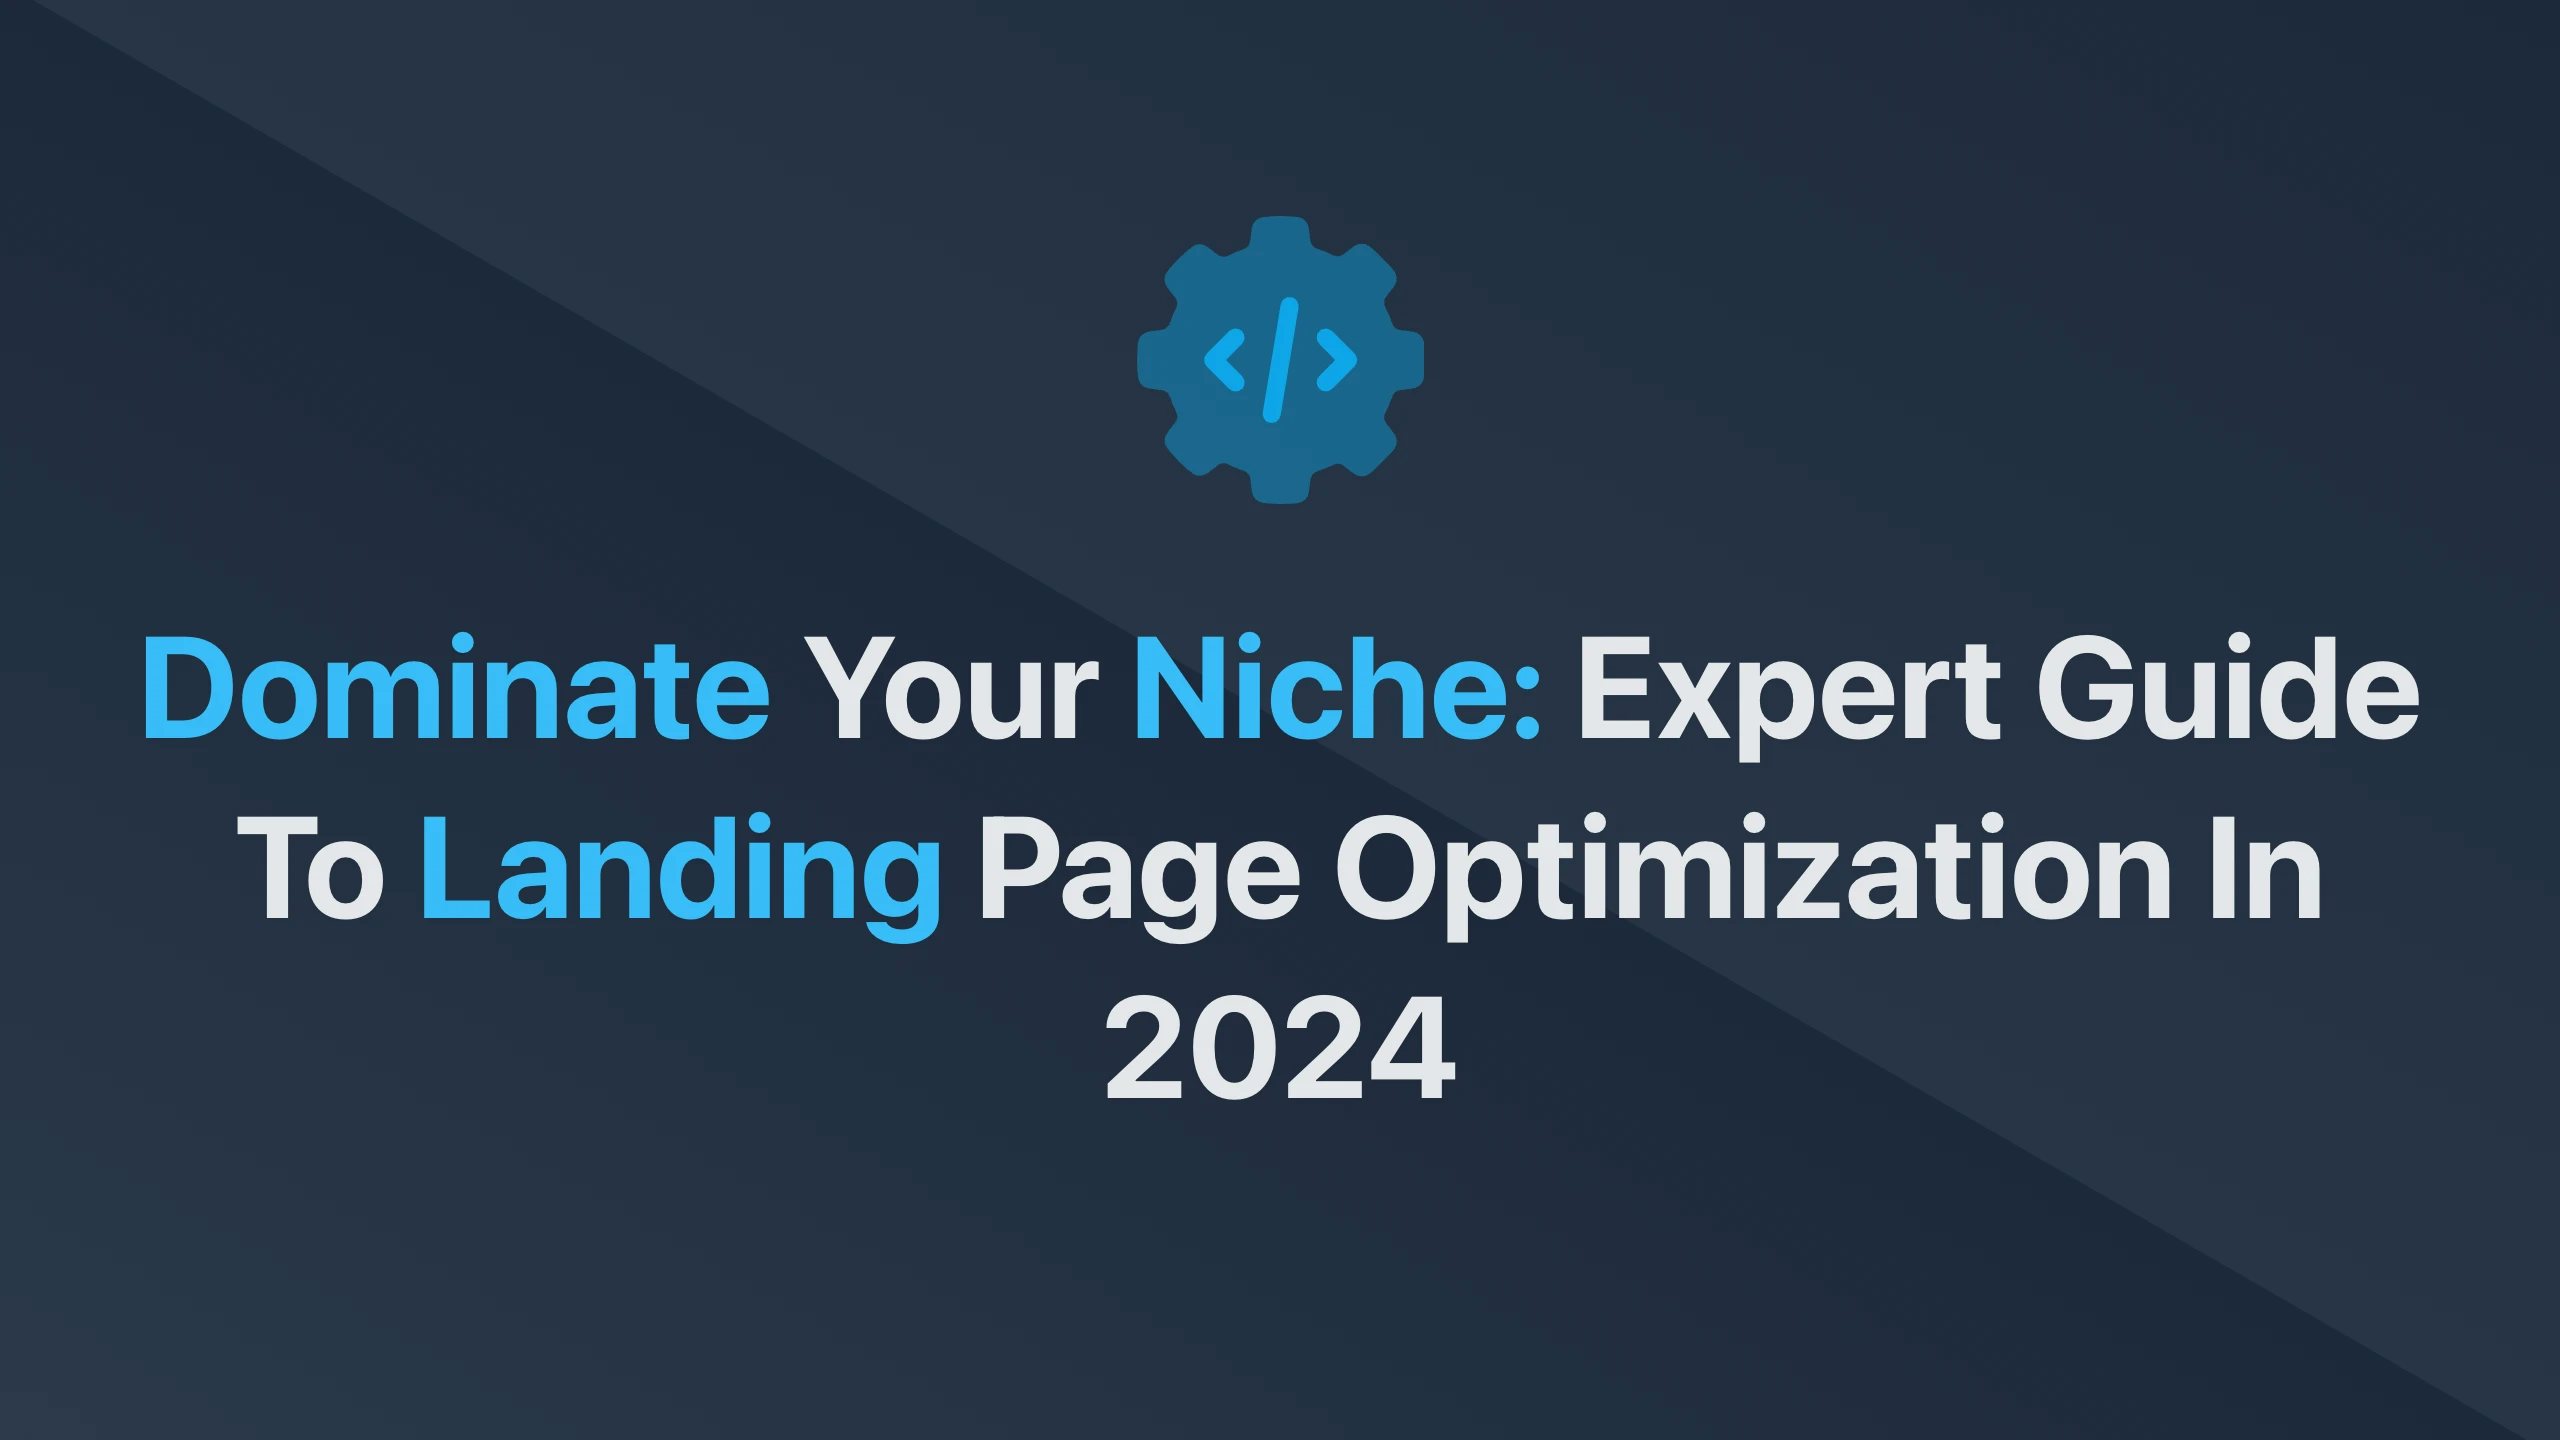 Cover Image for Dominate Your Niche: Expert Guide to Landing Page Optimization in 2024